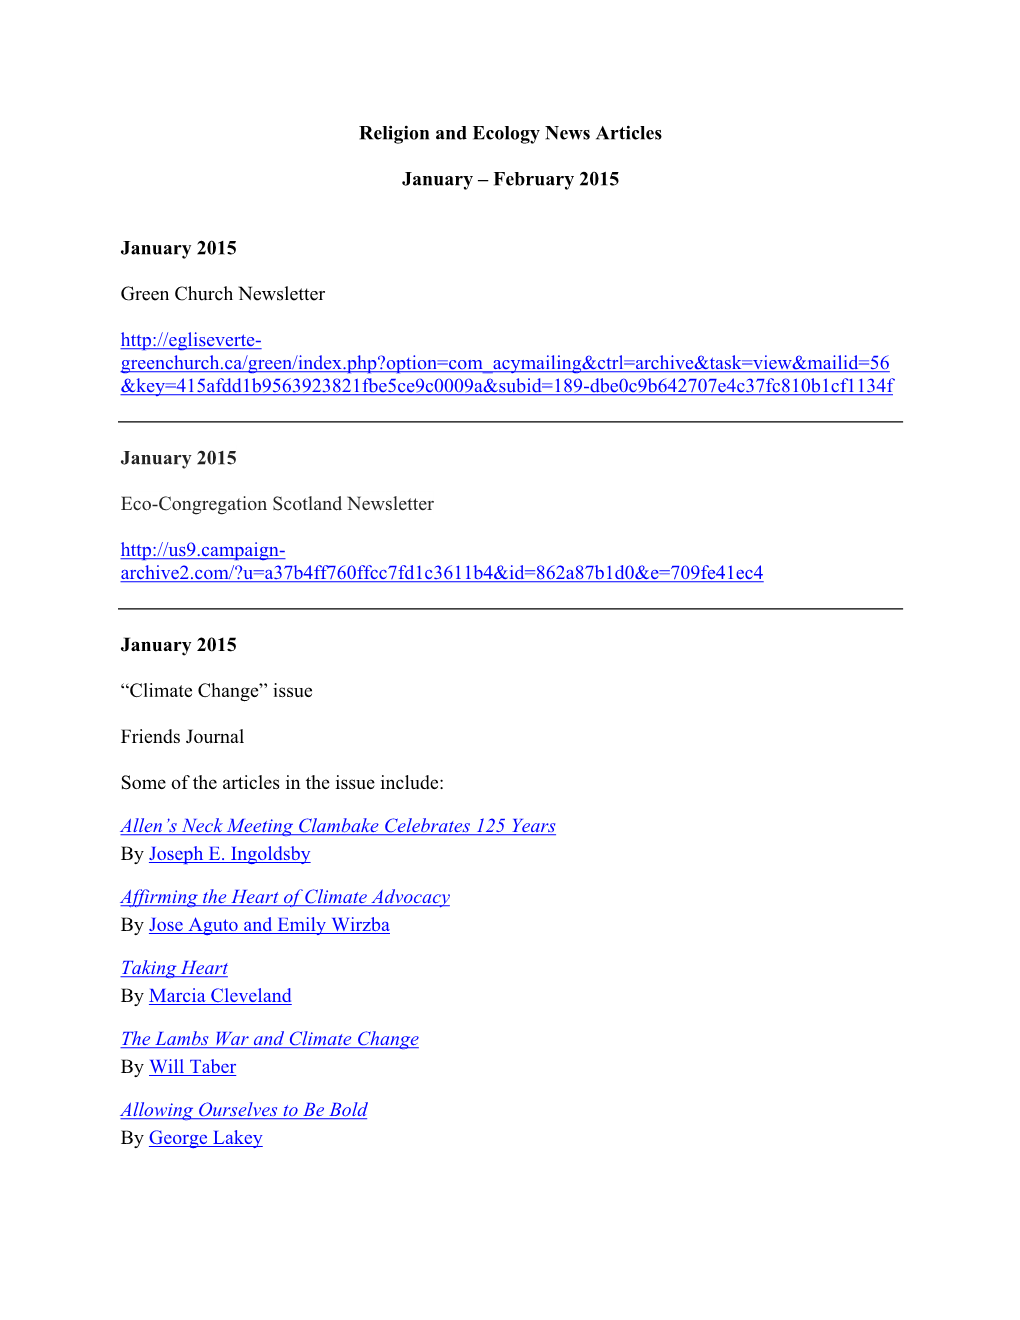 Religion and Ecology News Articles January – February 2015